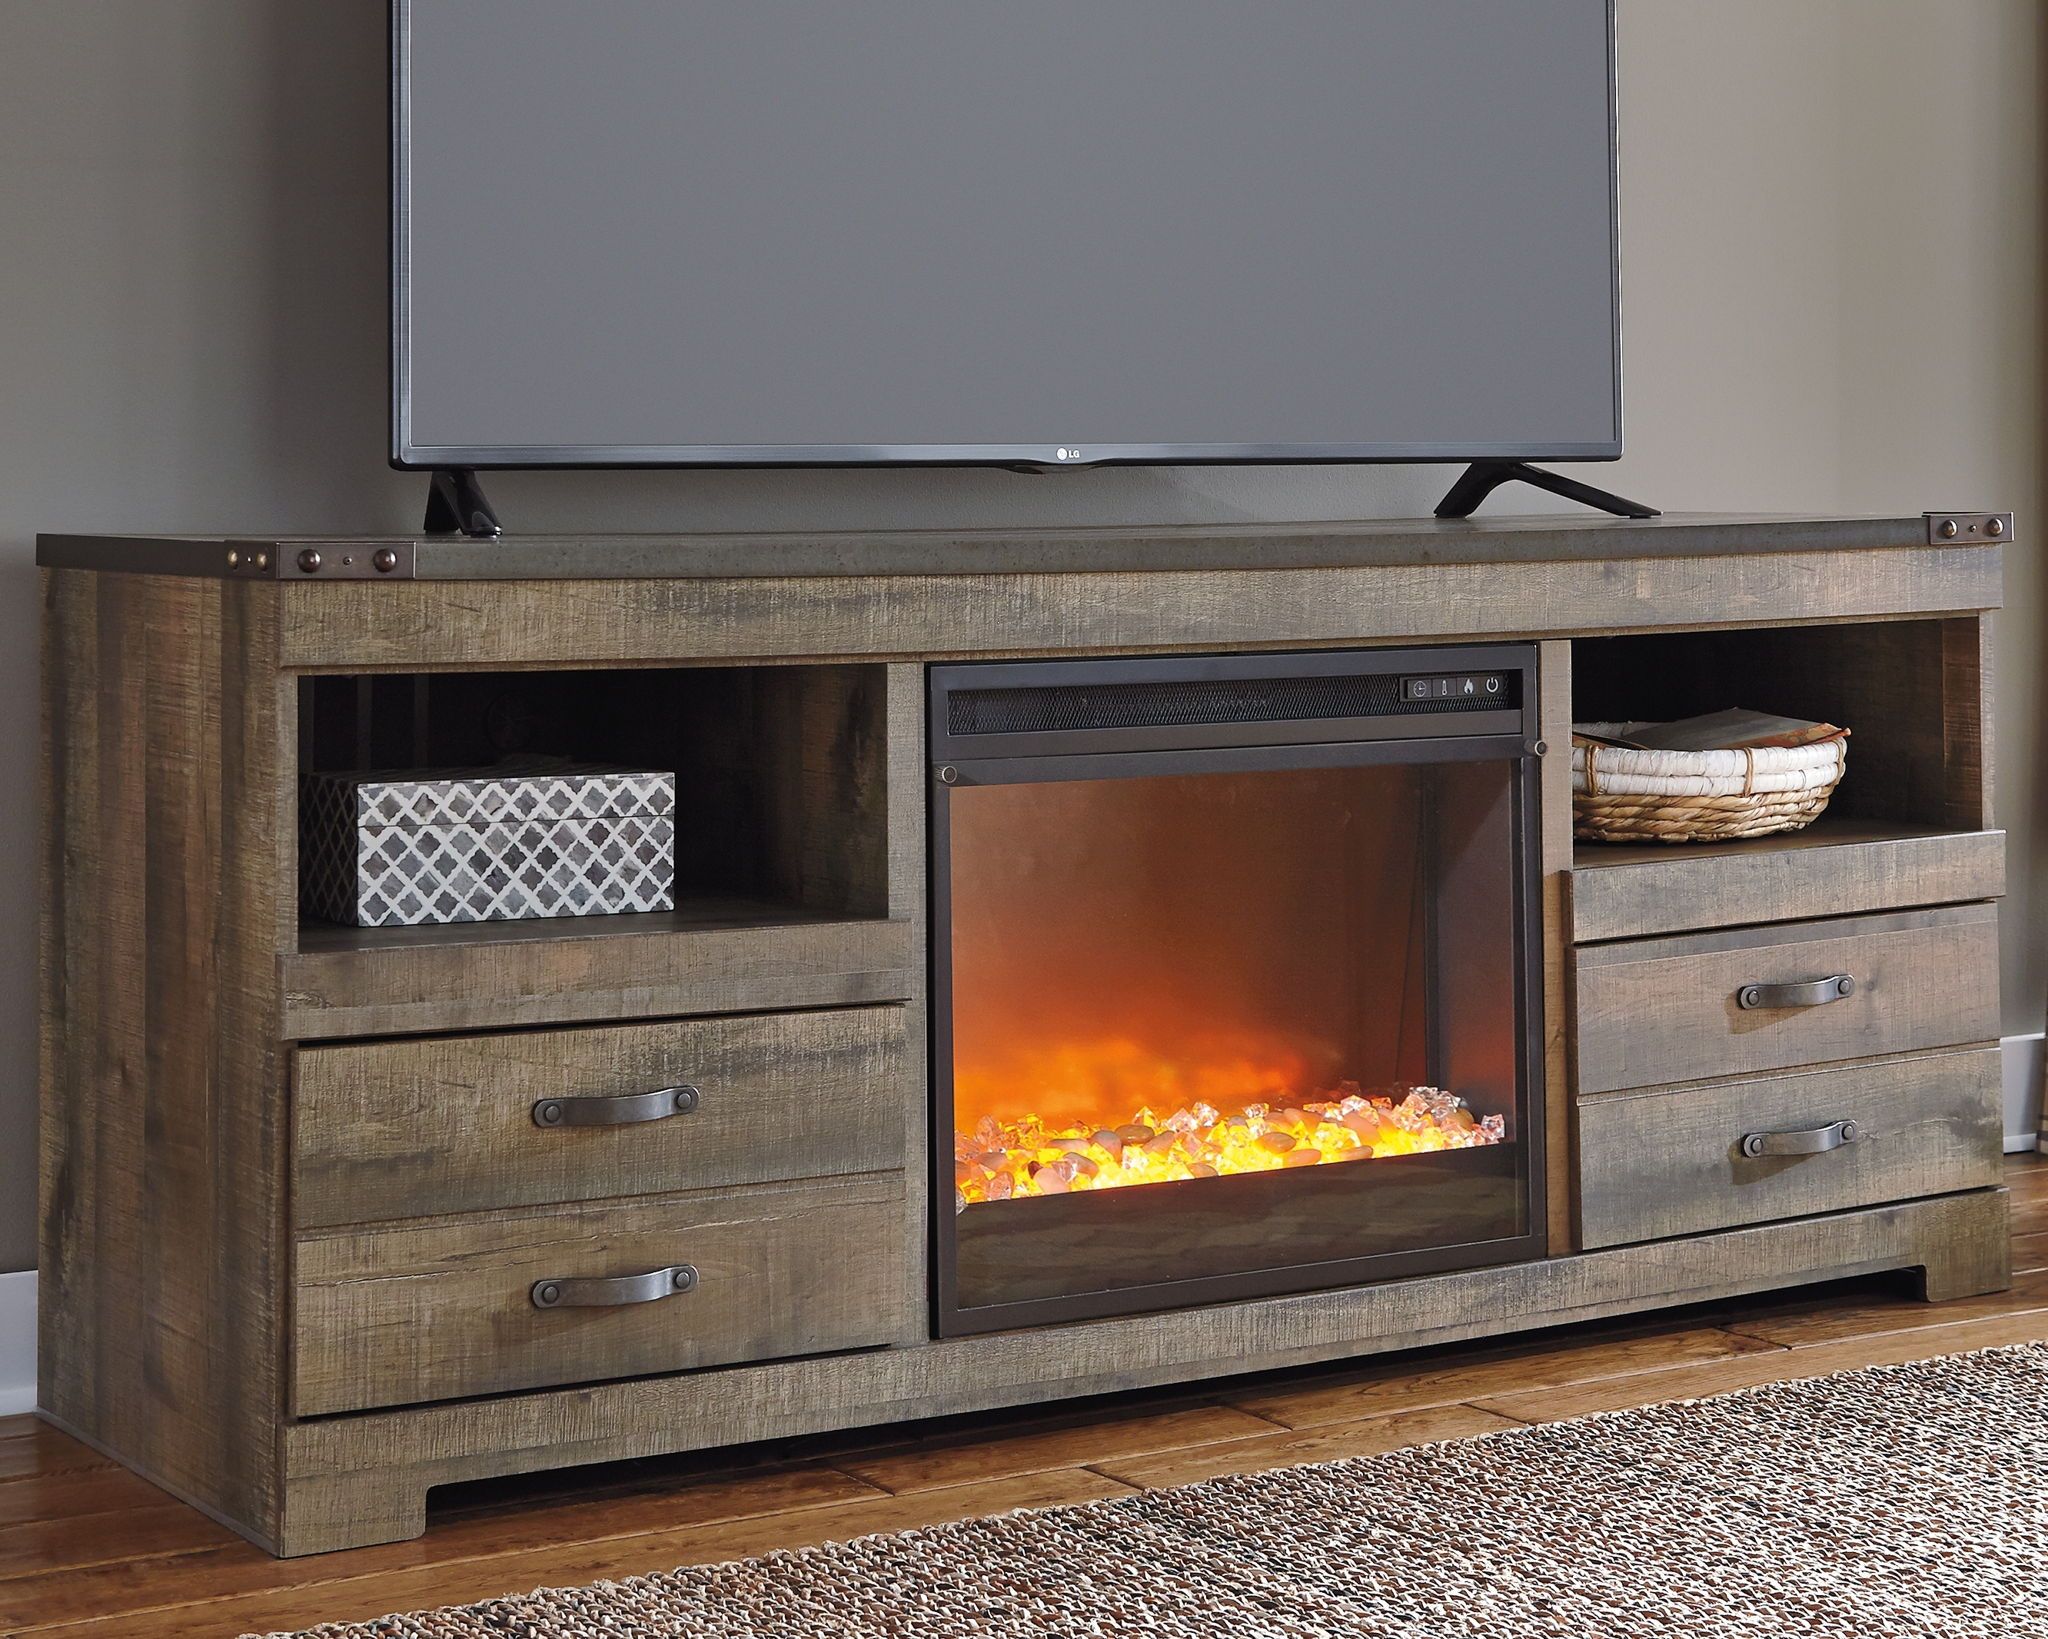 Trinell – Brown – Lg Tv Stand With Fireplace Insert Glass Throughout Dark Brown Corner Tv Stands (View 5 of 15)